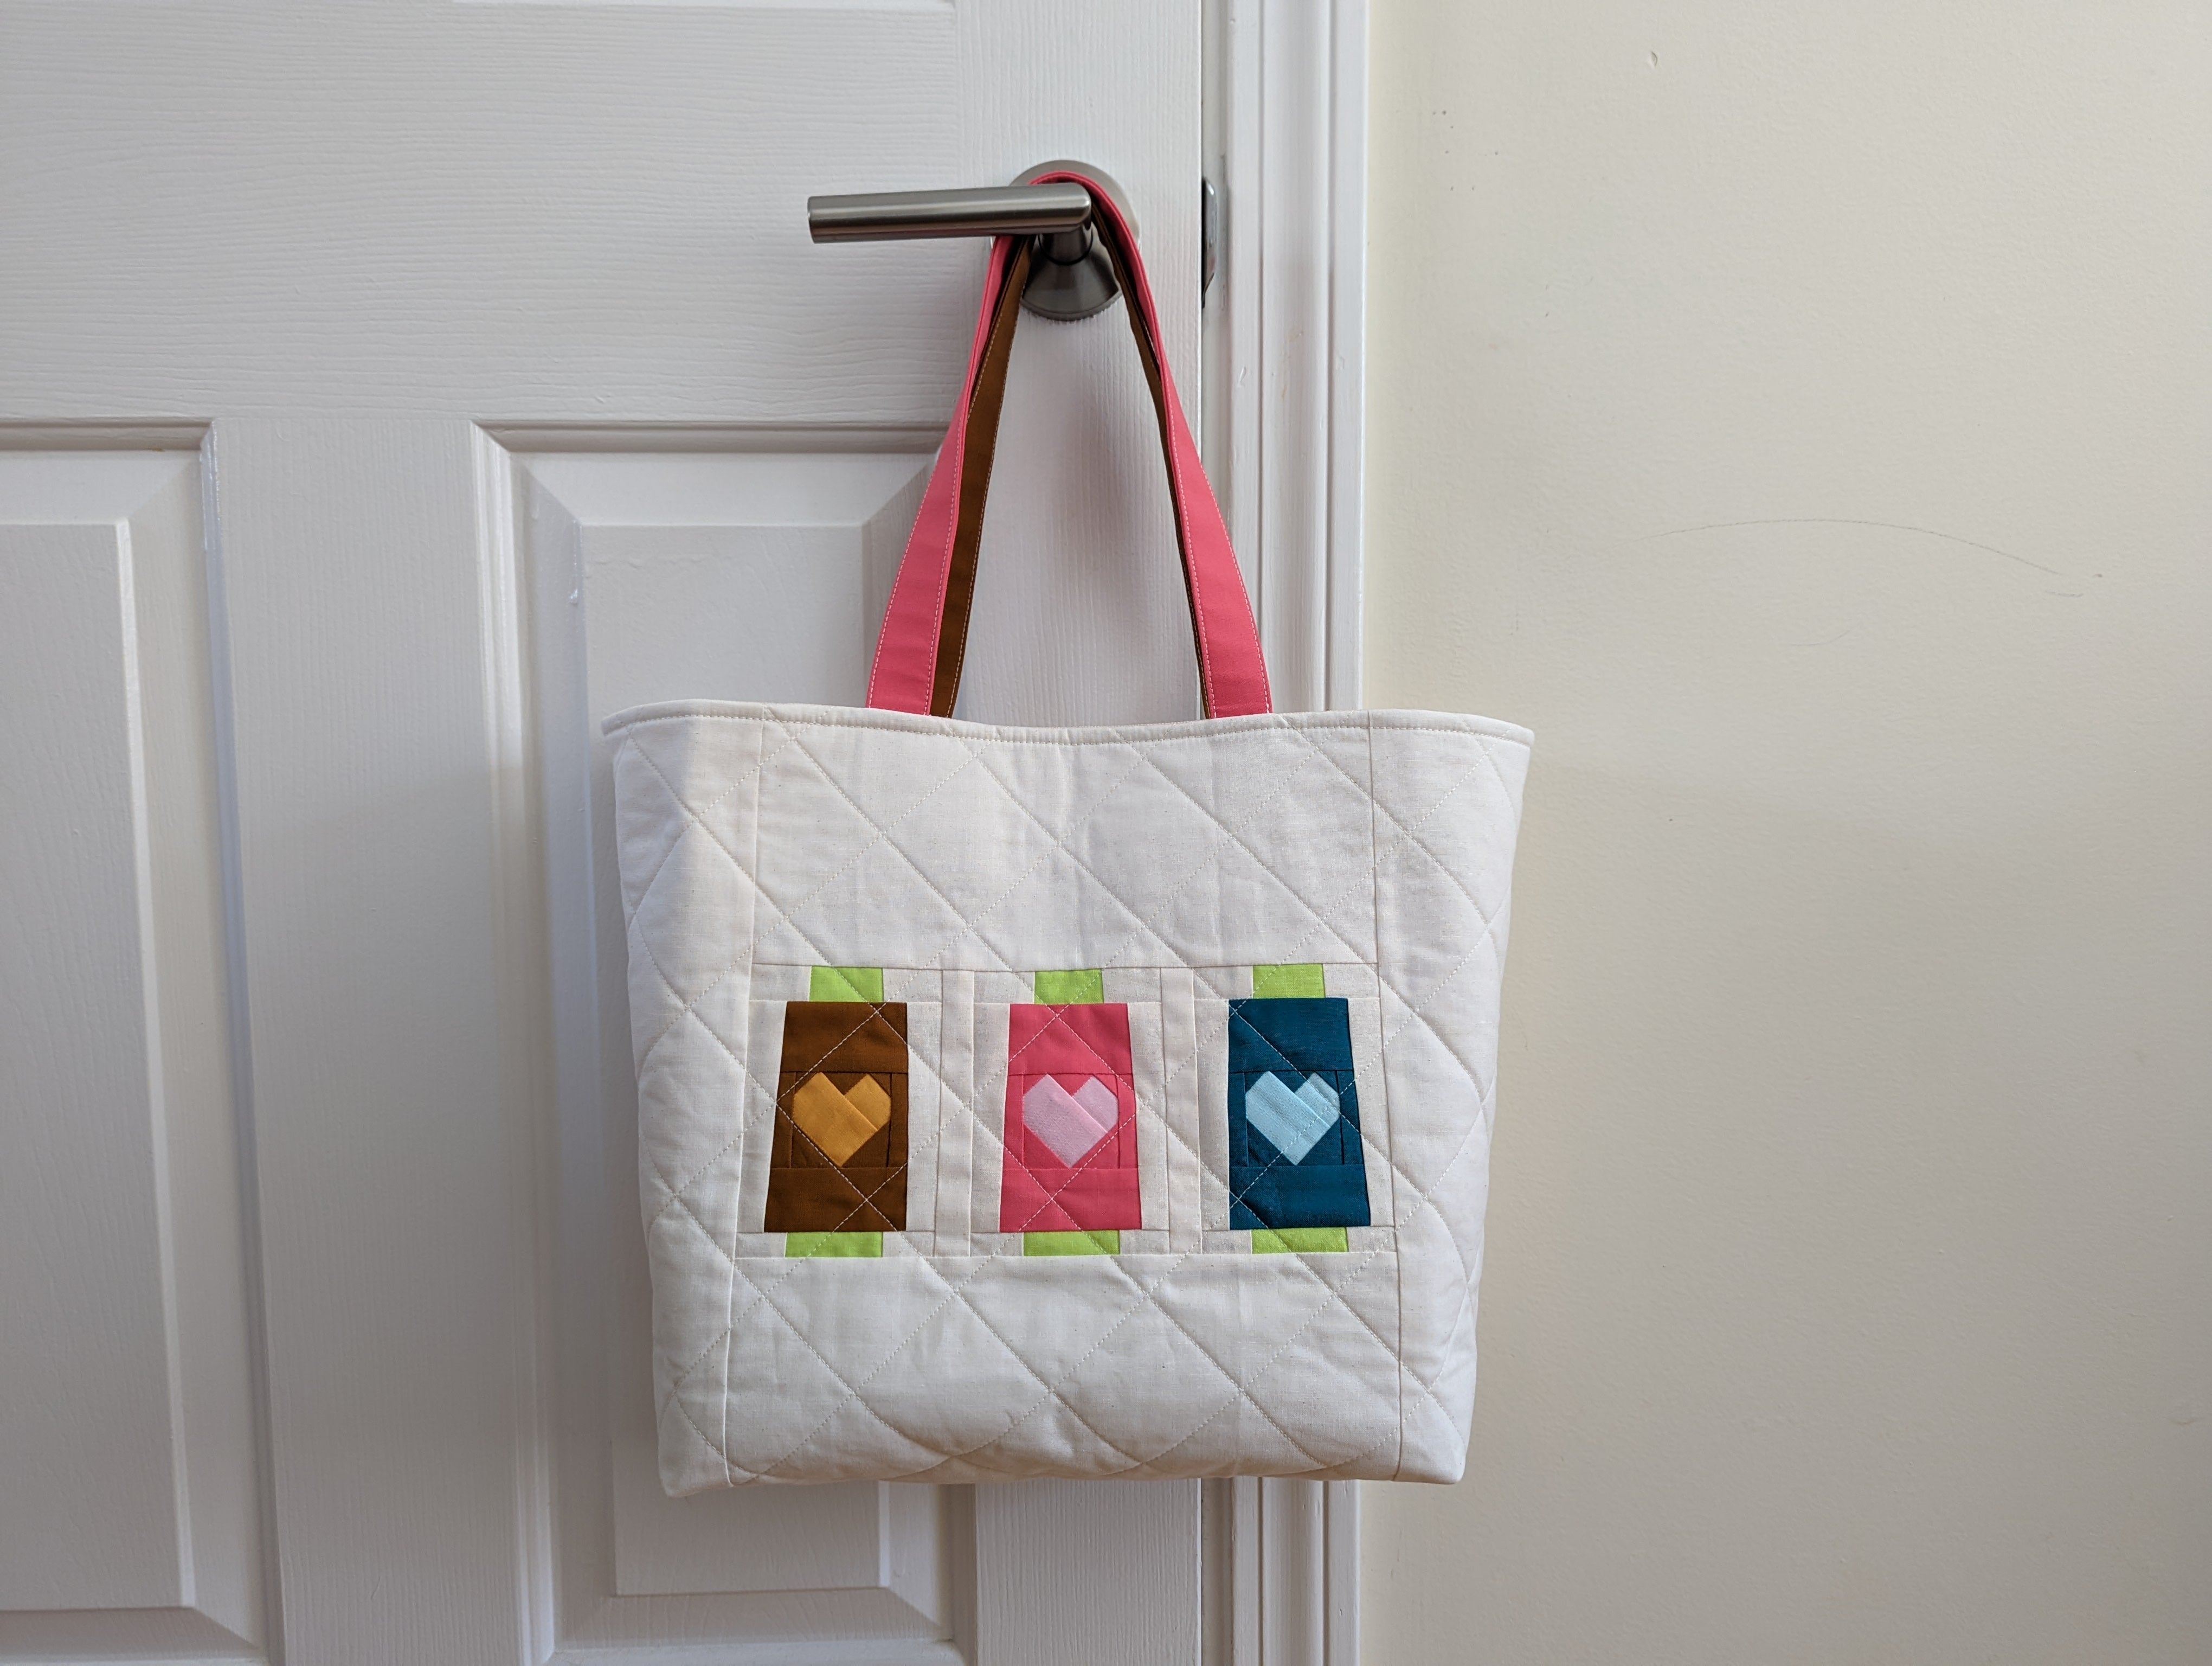 Carry All Tote Bag Pattern by Missouri Star